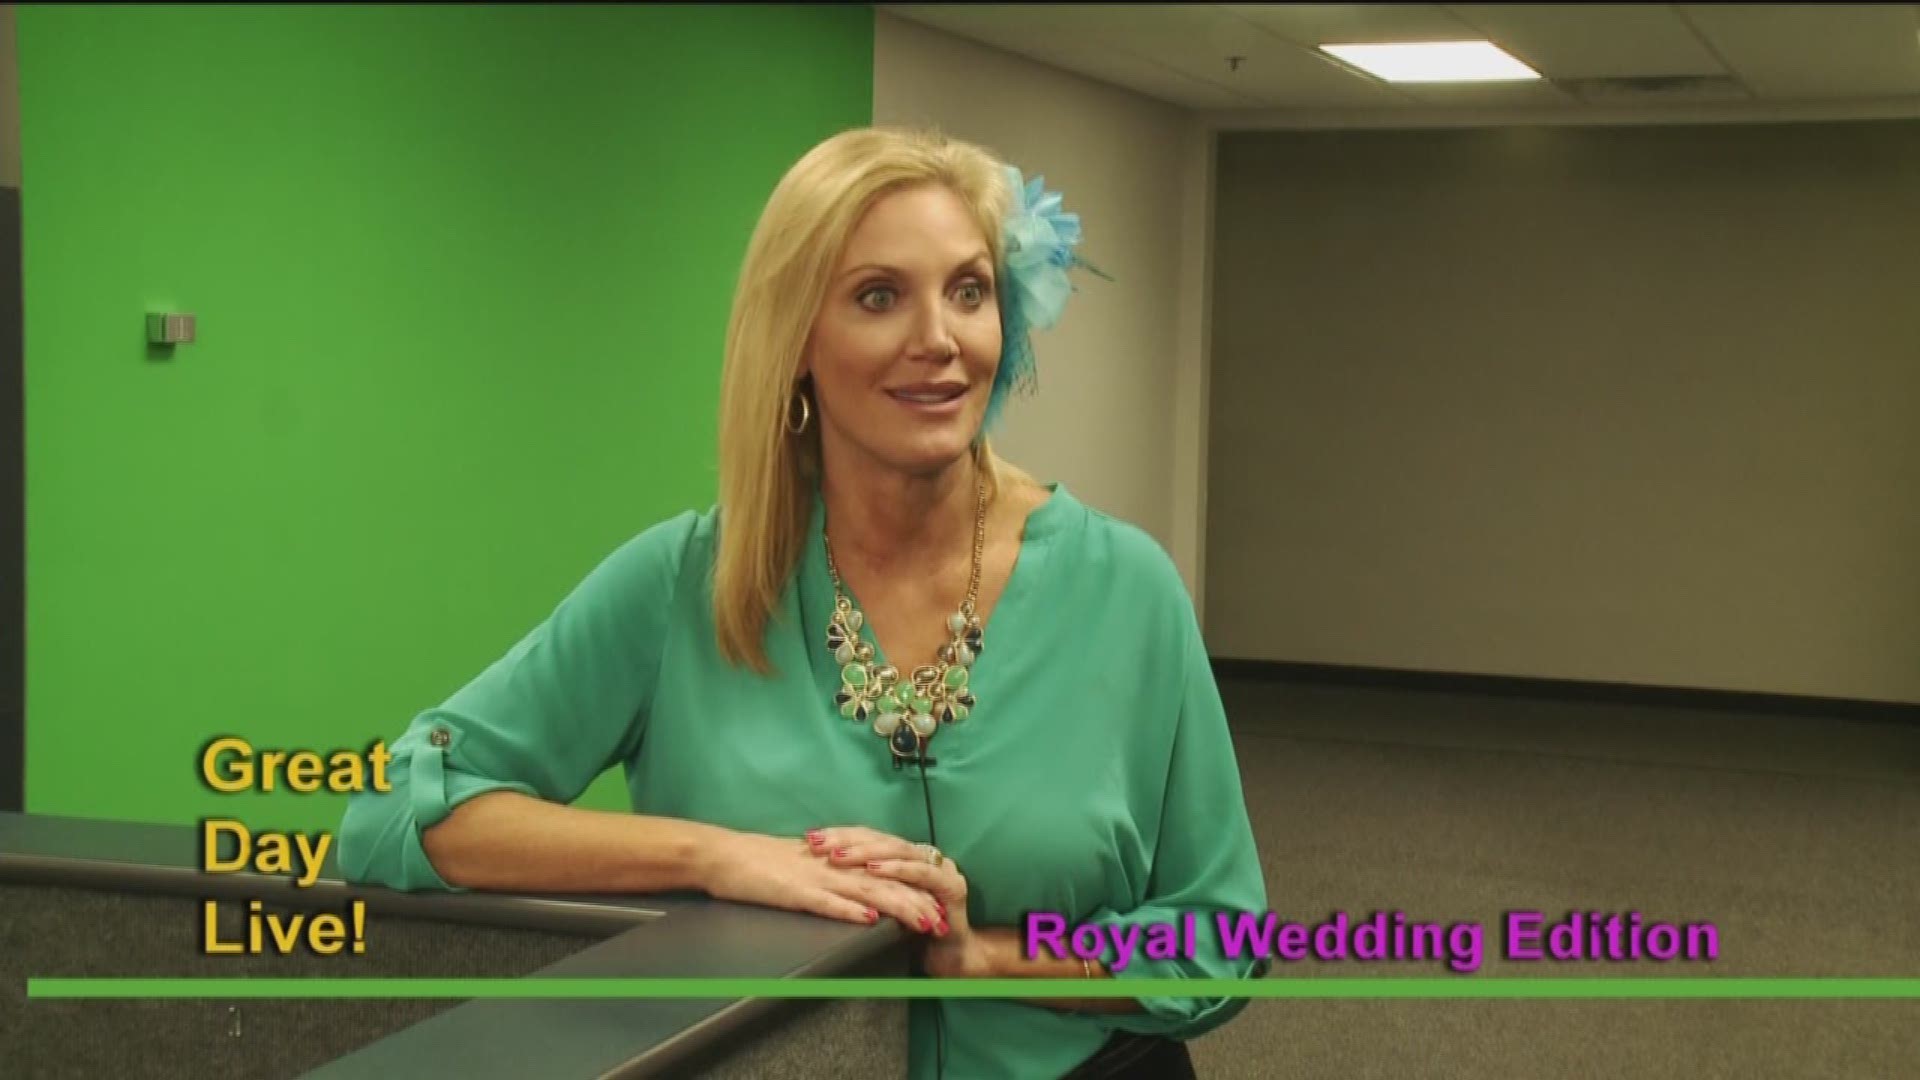 Members of the WHAS11 staff share their excitement for the royal wedding and tell us what the experience means to them.